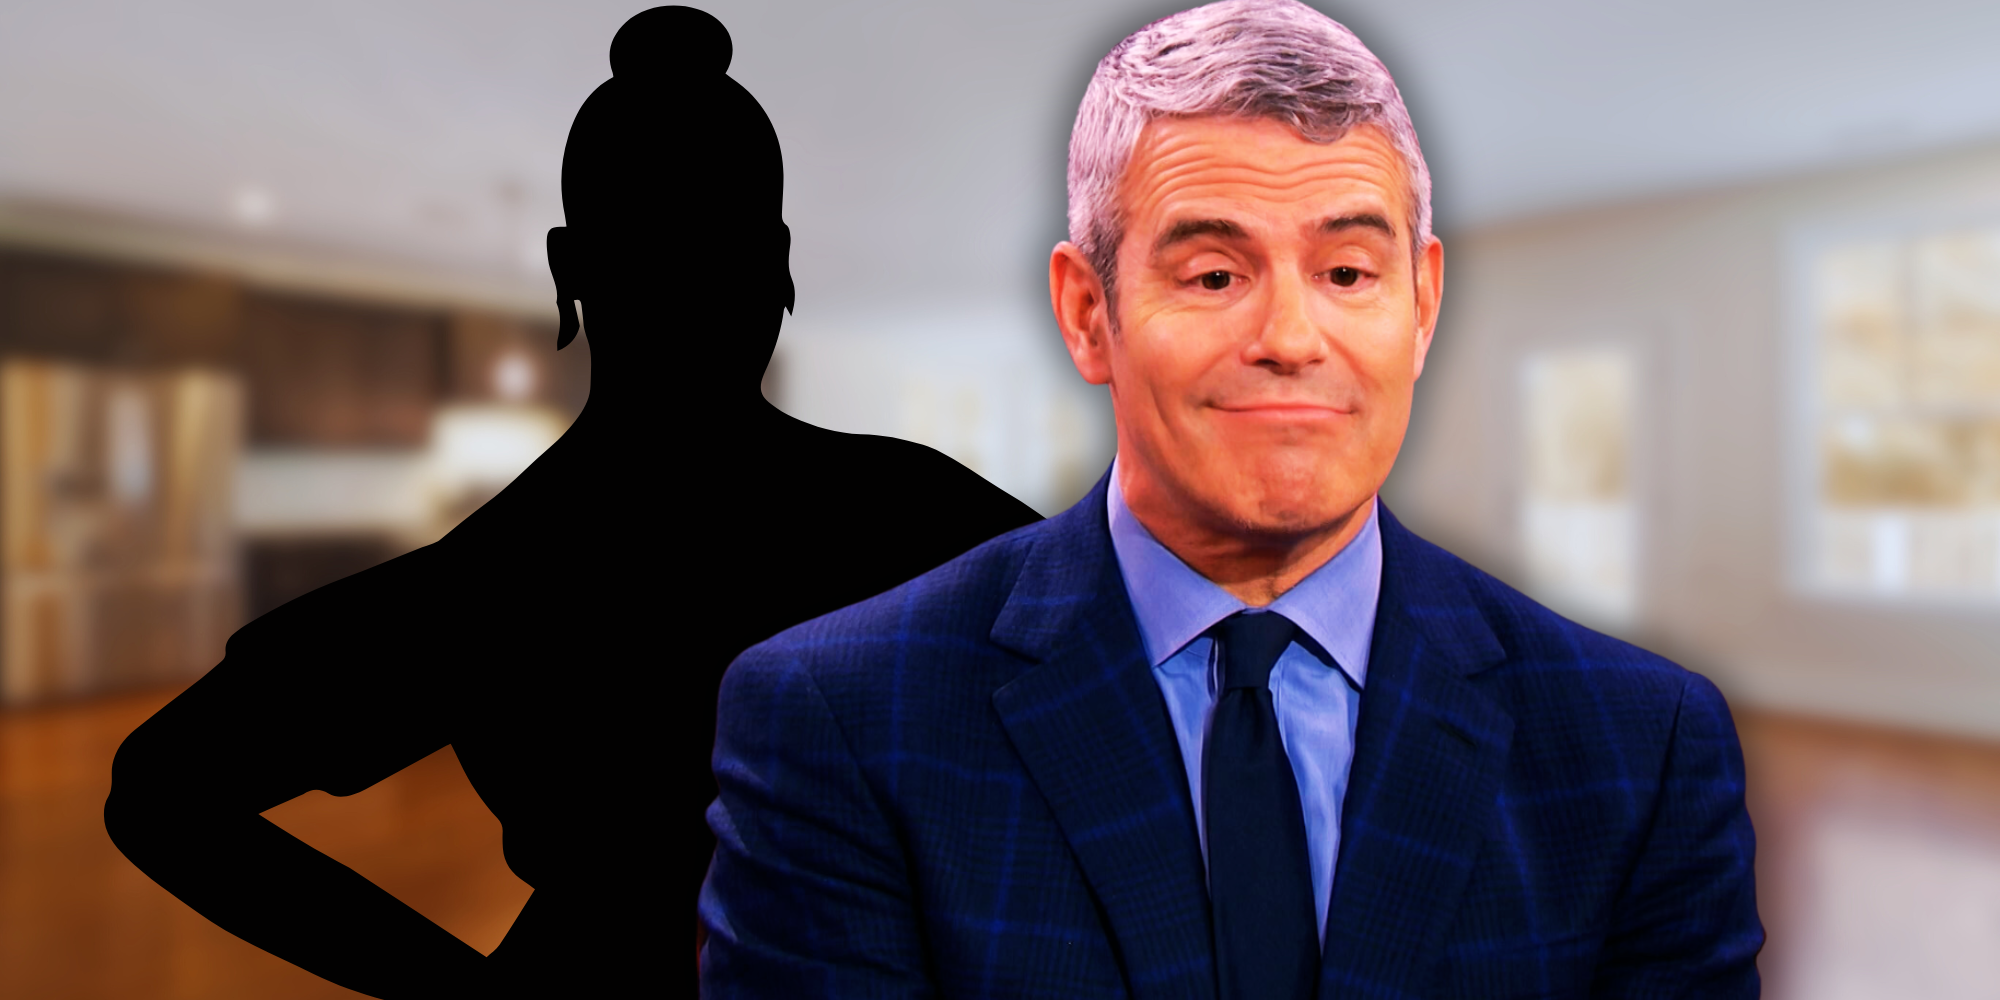 andy cohen montage making funny face mystery person background